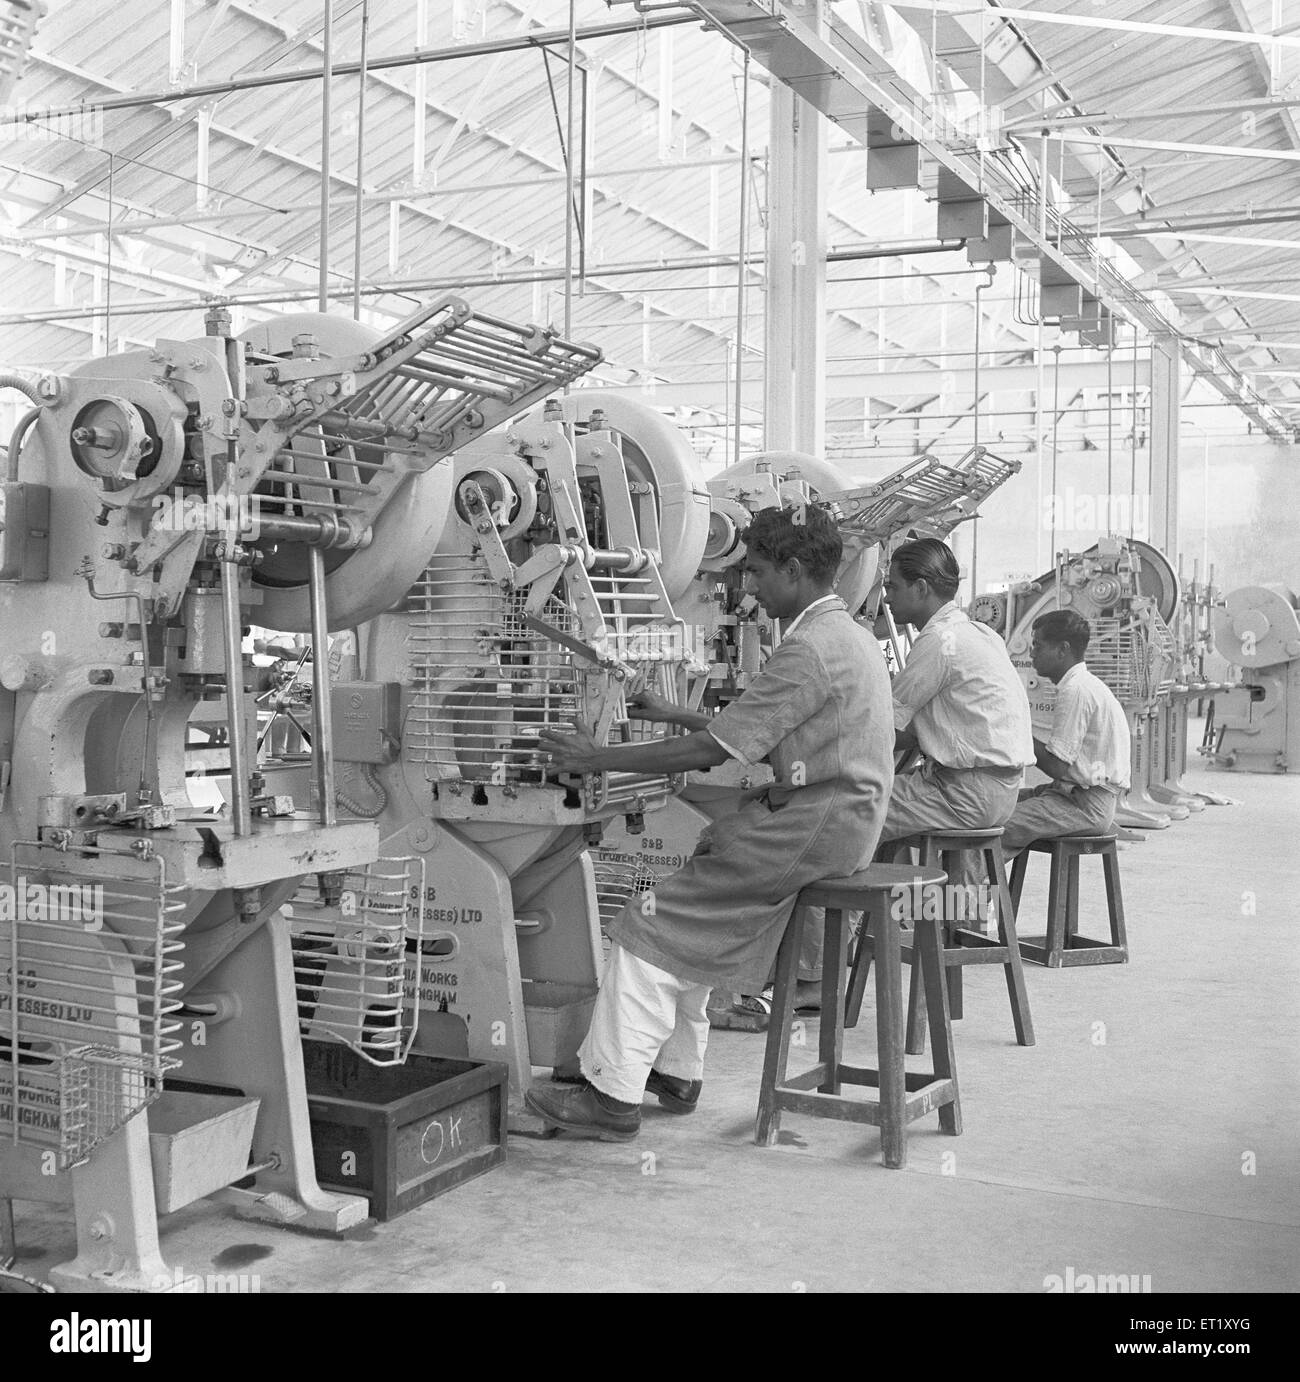 Workers at assembly line, telephone factory, telephone instruments manufacture, Bangalore, Karnataka, India, Asia, 1950, old vintage 1900s b & w image Stock Photo